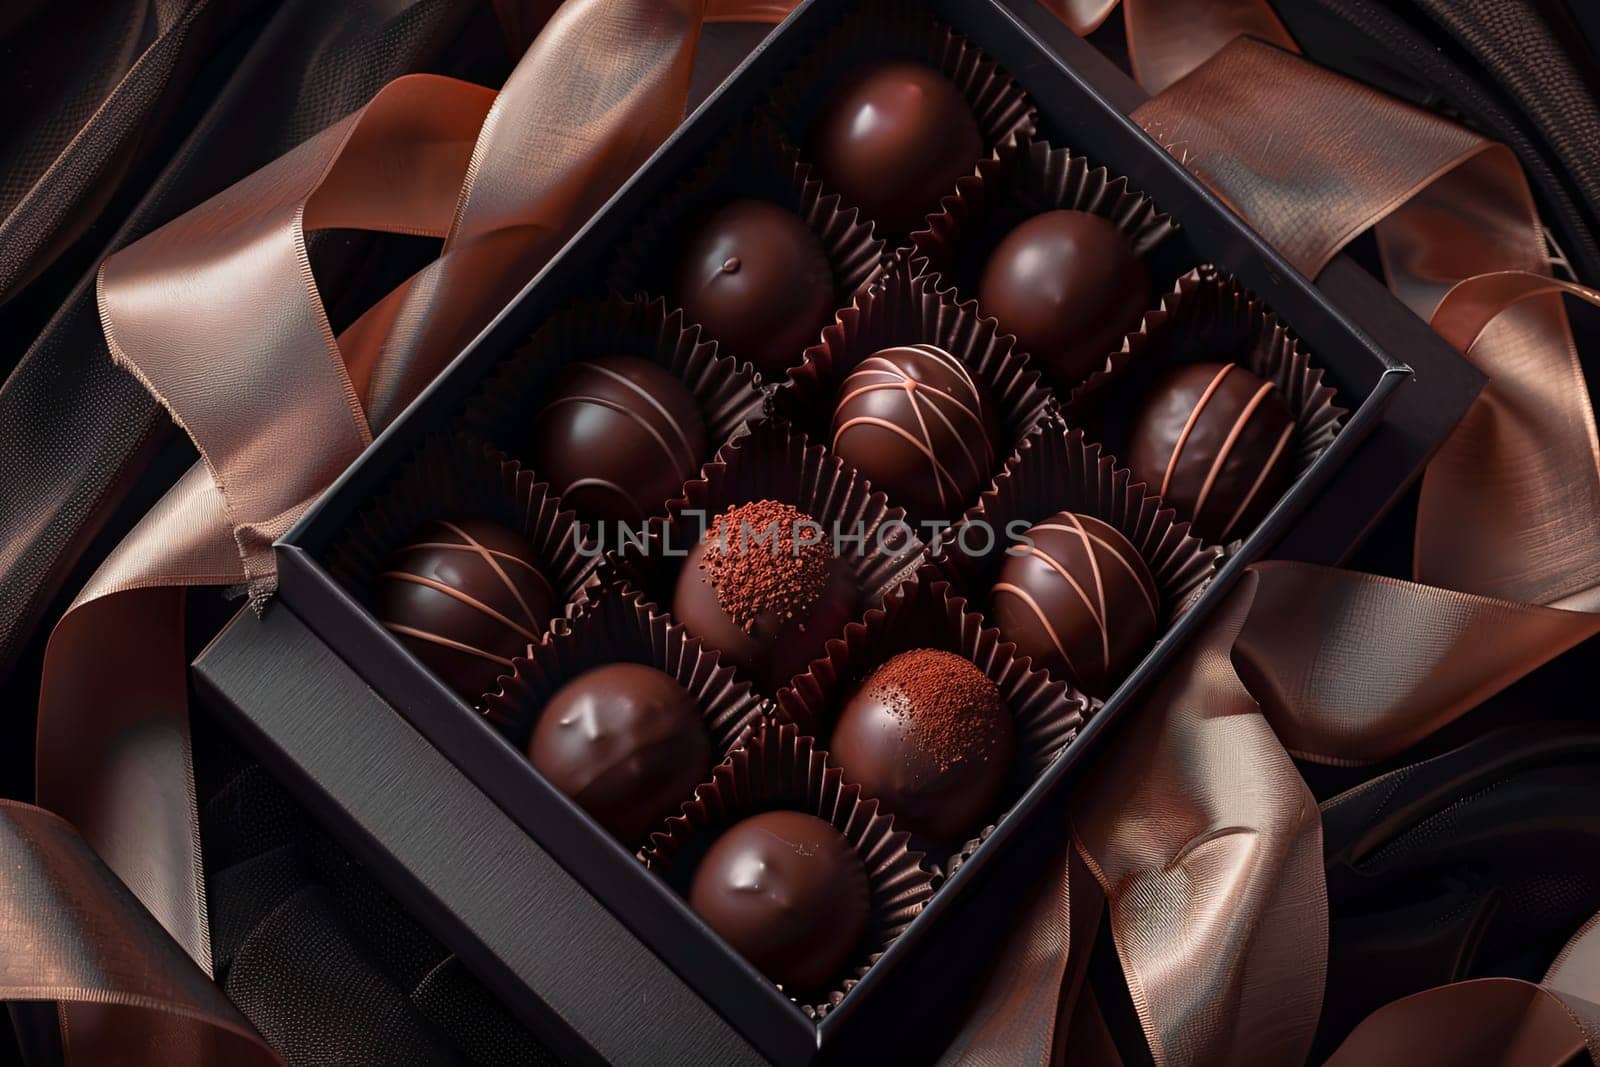 High detail image of a luxurious box of chocolate truffles adorned with ribbons in rich dark colors.